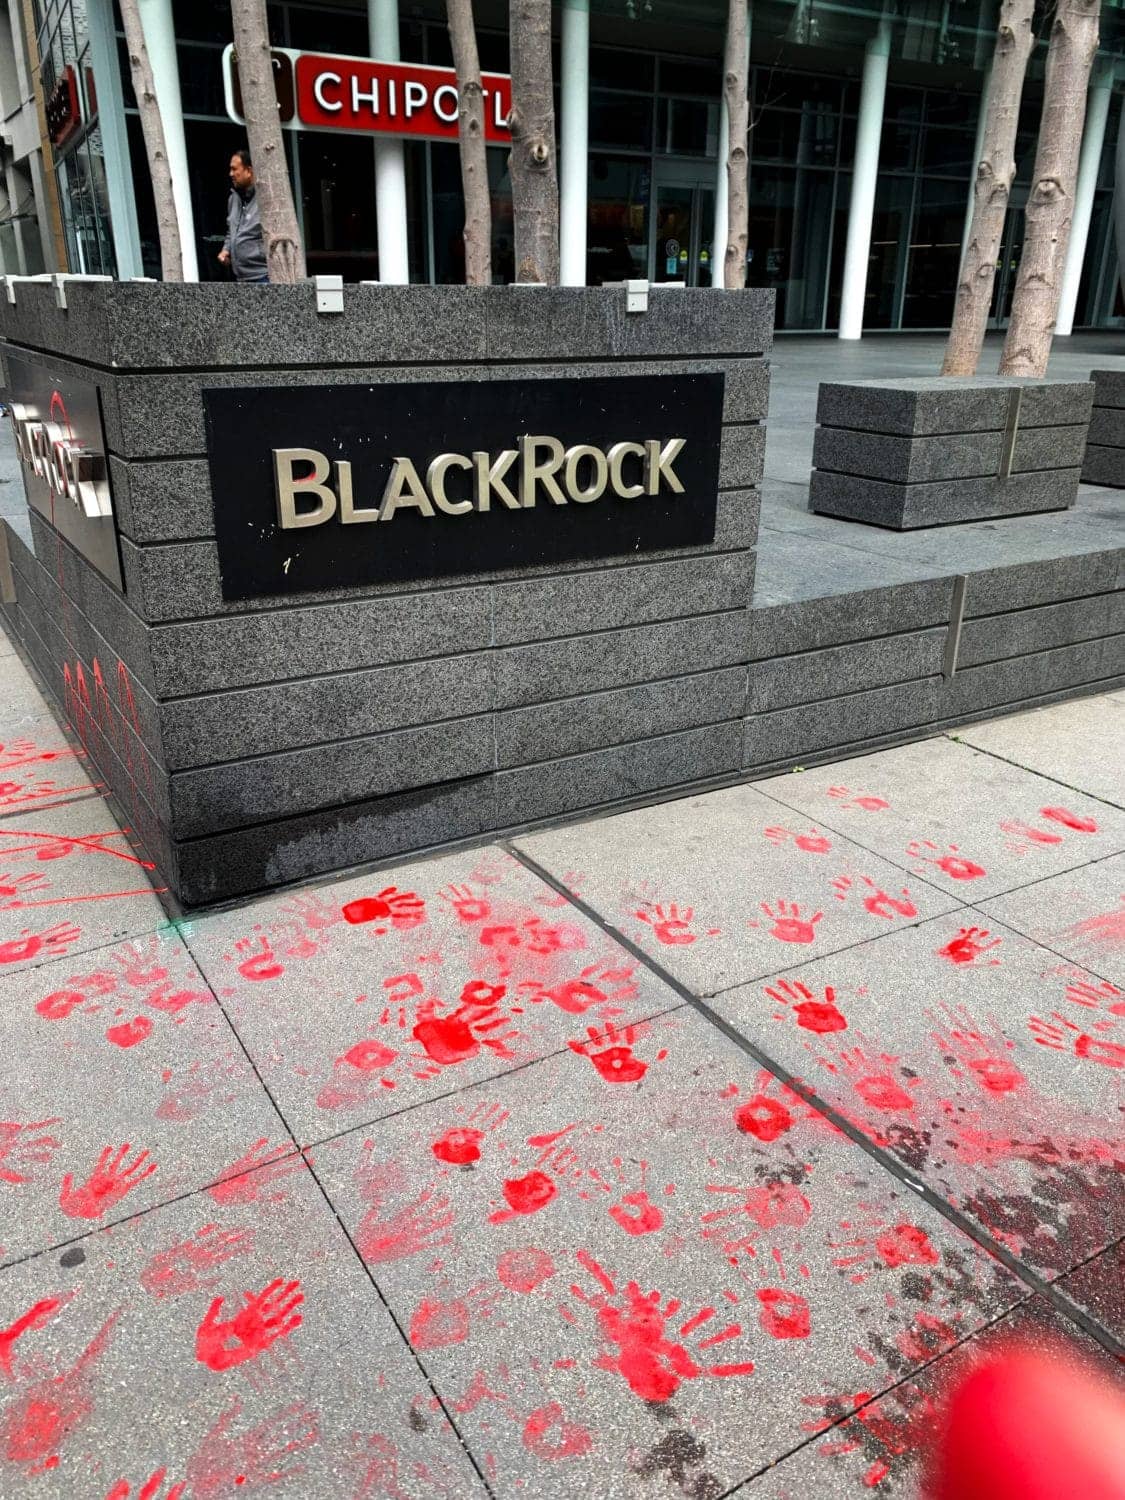 BlackRock-bloody-handprints-Youth-vs.-Apocalypse-protest-by-Nube-032522, Youth climate strike on People’s Earth Day April 22, 2022, Culture Currents News & Views 